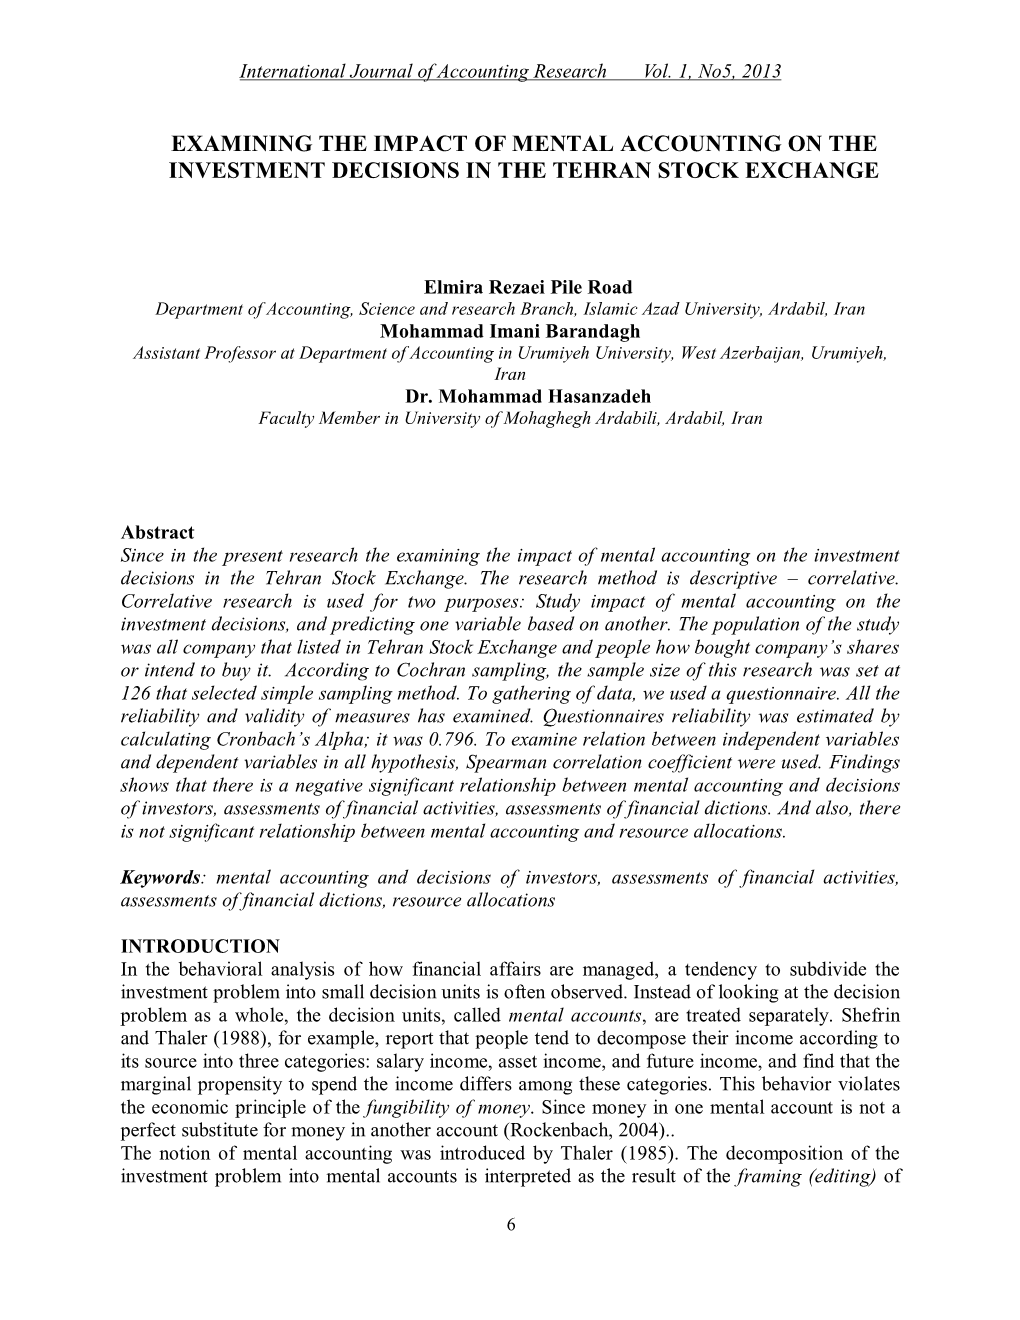 Examining the Impact of Mental Accounting on the Investment Decisions in the Tehran Stock Exchange